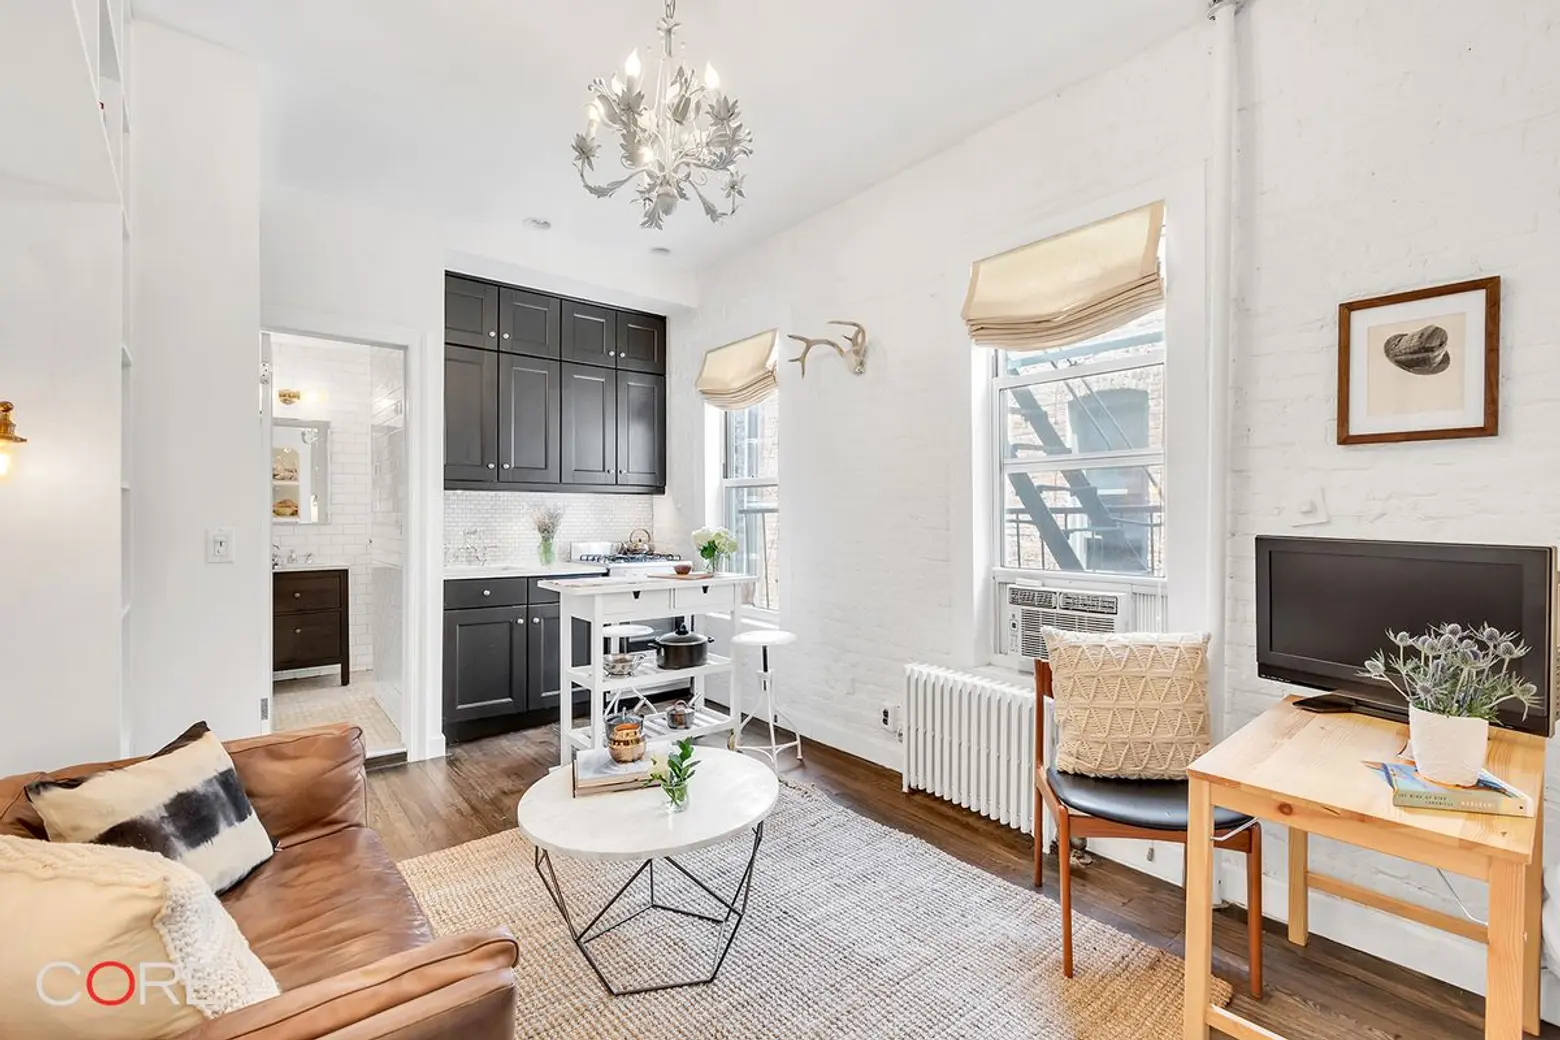 $2,500/month Soho studio fits a lot of storage and charm into 200 square feet